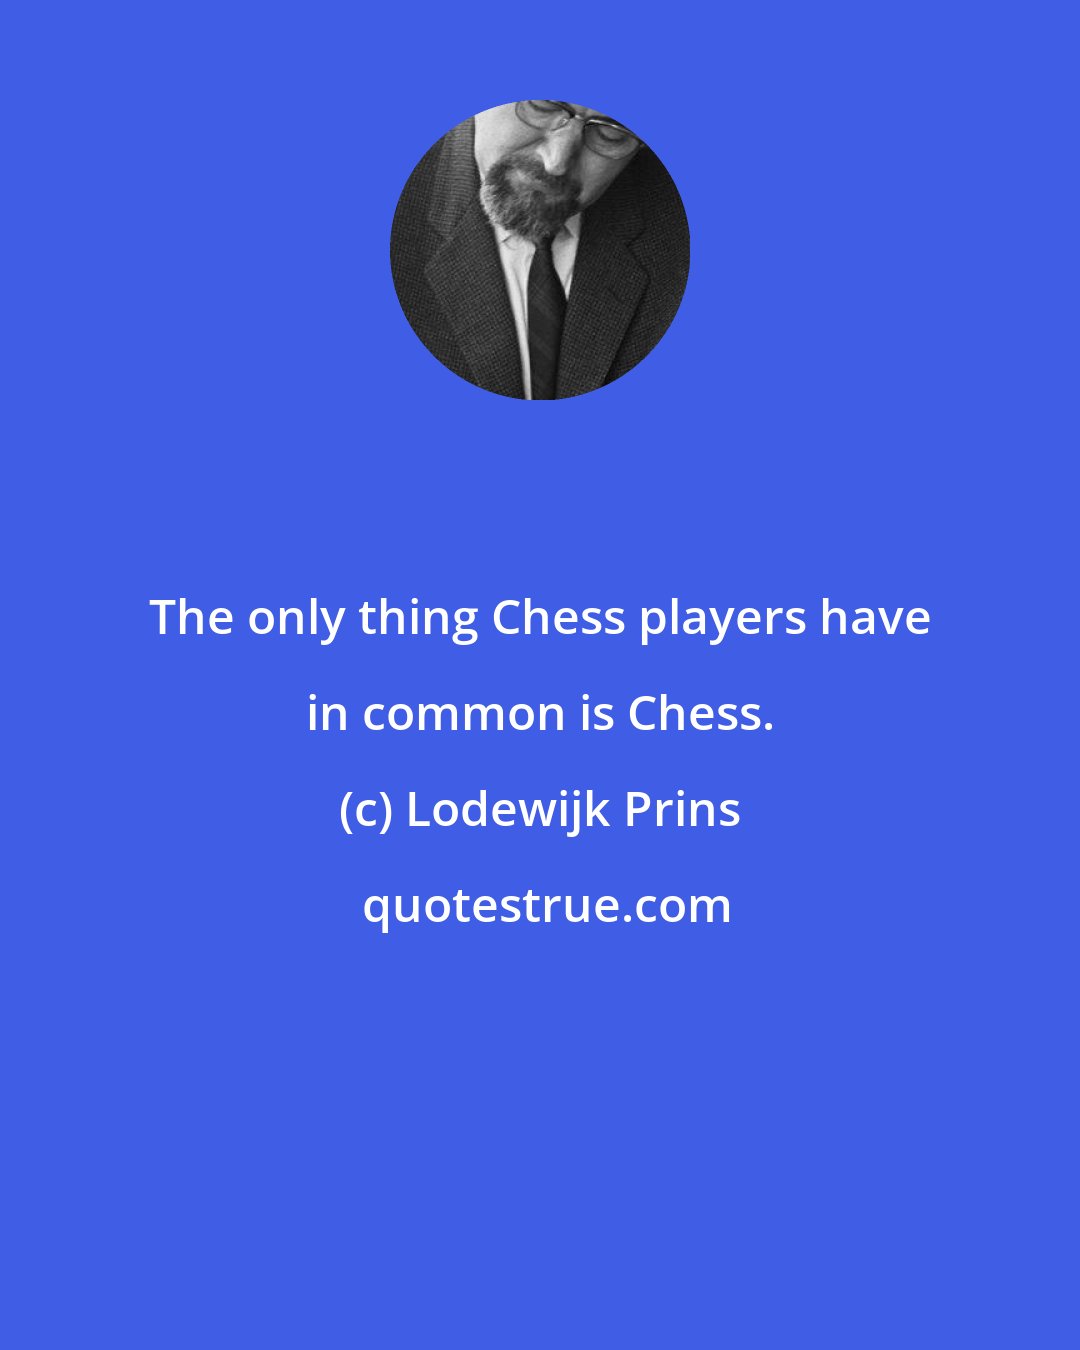 Lodewijk Prins: The only thing Chess players have in common is Chess.